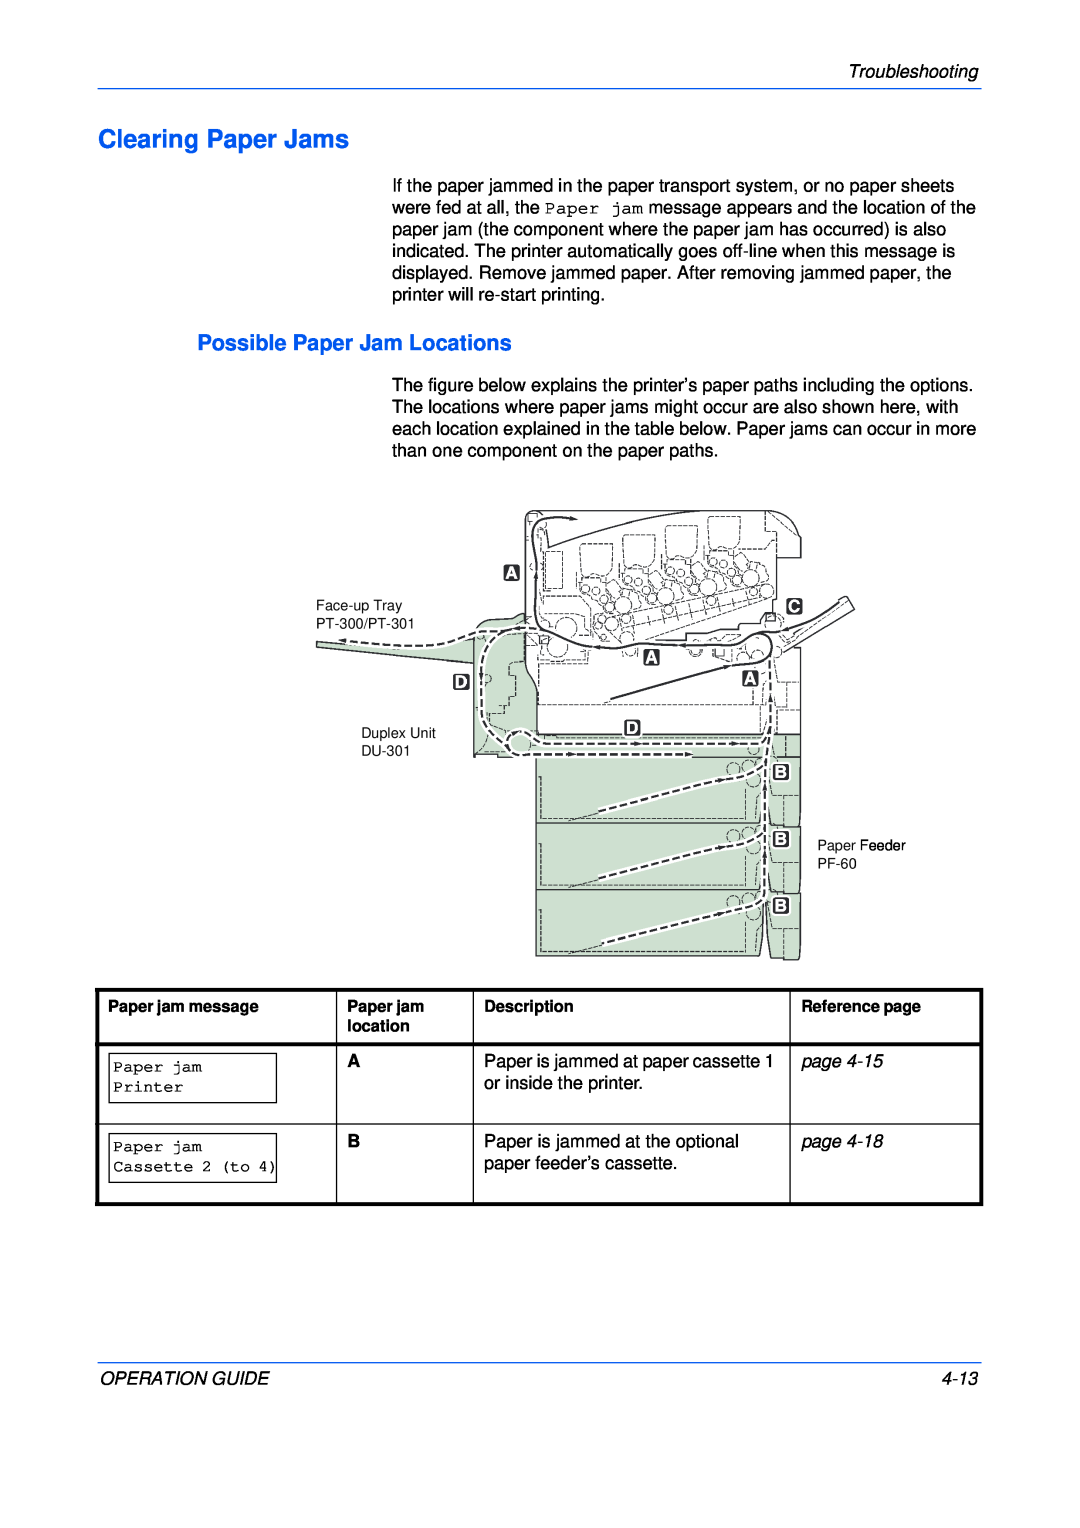 Kyocera FS-C5025N manual Clearing Paper Jams, Possible Paper Jam Locations, Troubleshooting, page, Operation Guide, 4-13 